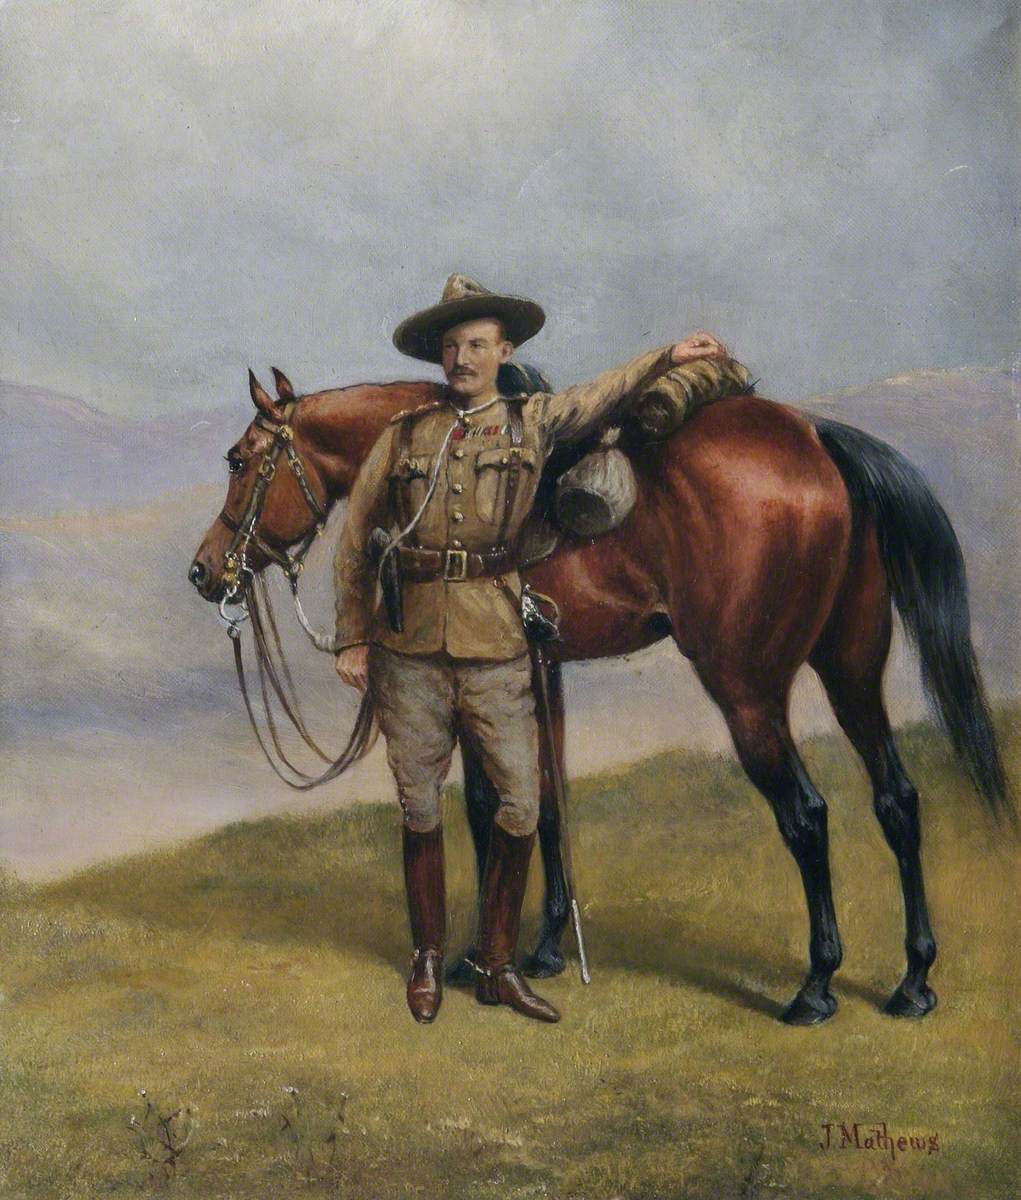 Baden-Powell in the Uniform of the South African Constabulary, Standing by His Charger